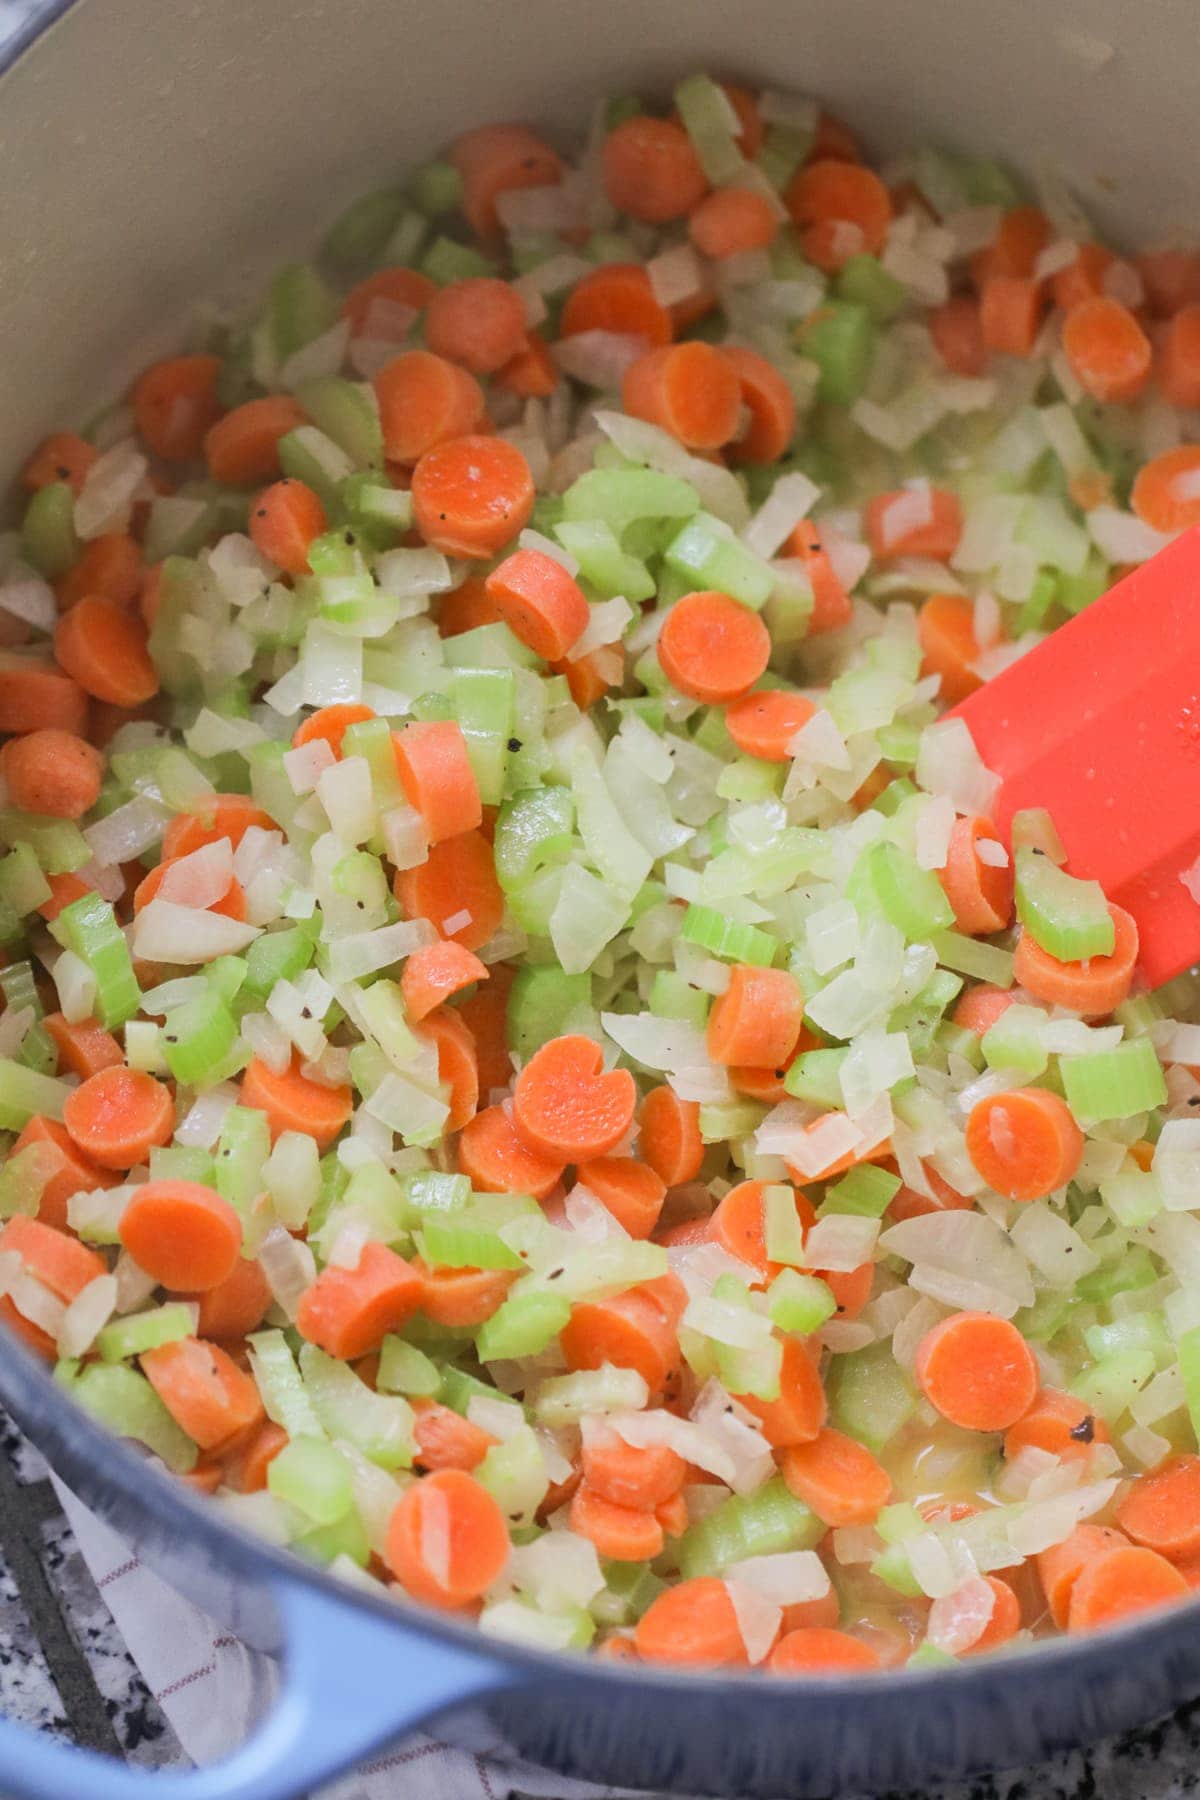 Carrots, Celery and Onions